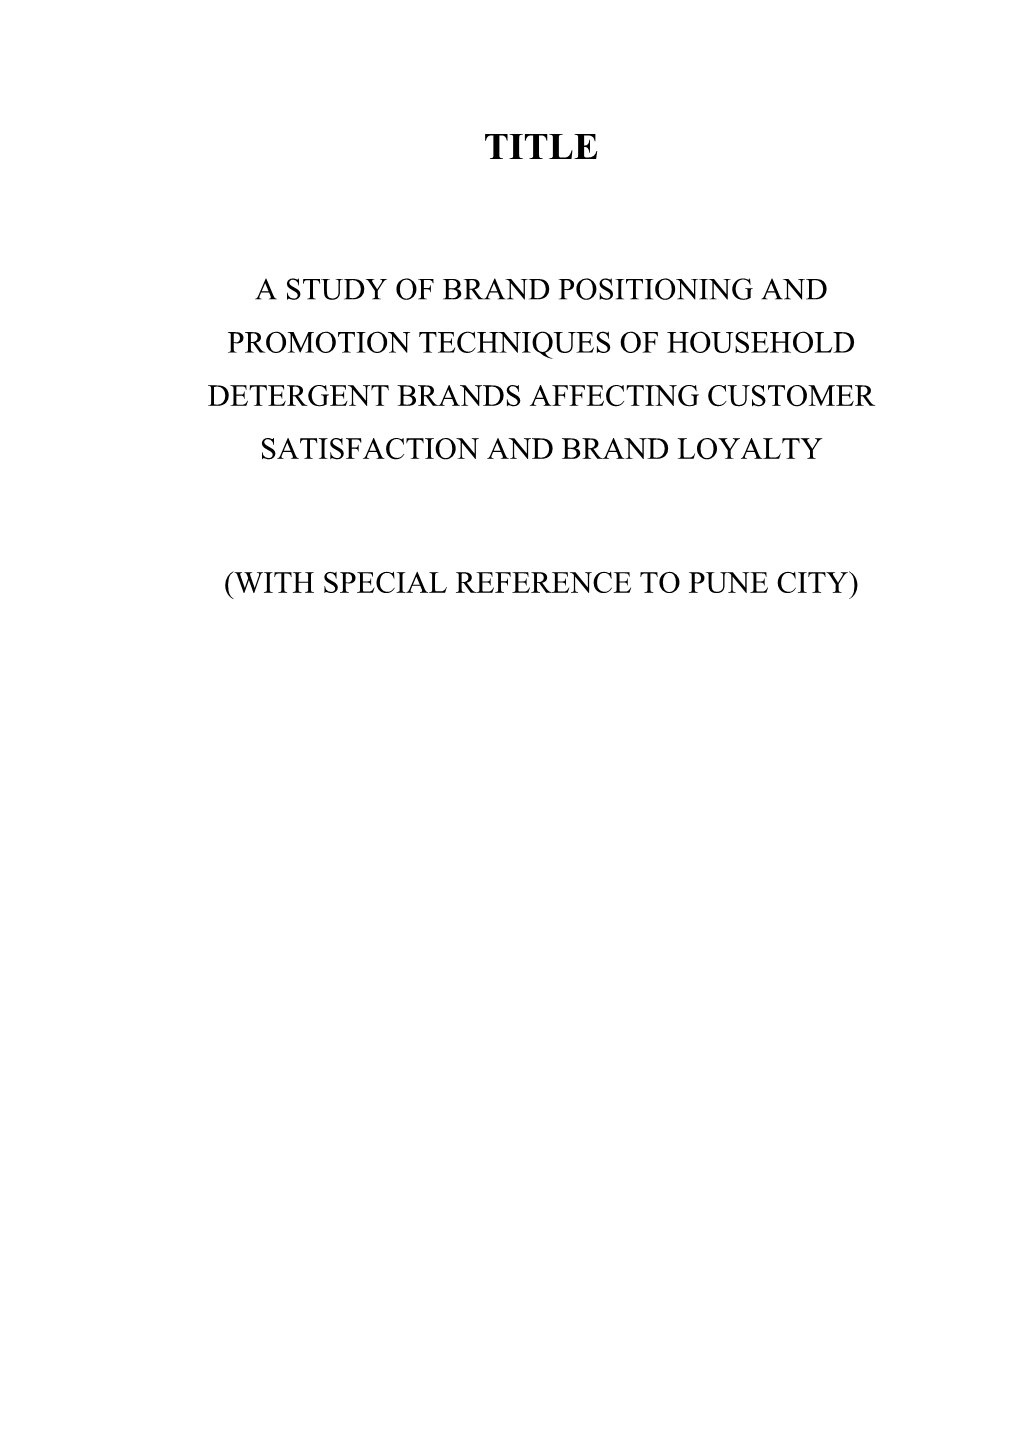 A Study of Brand Positioning and Promotion Techniques of Household Detergent Brands Affecting Customer Satisfaction and Brand Loyalty